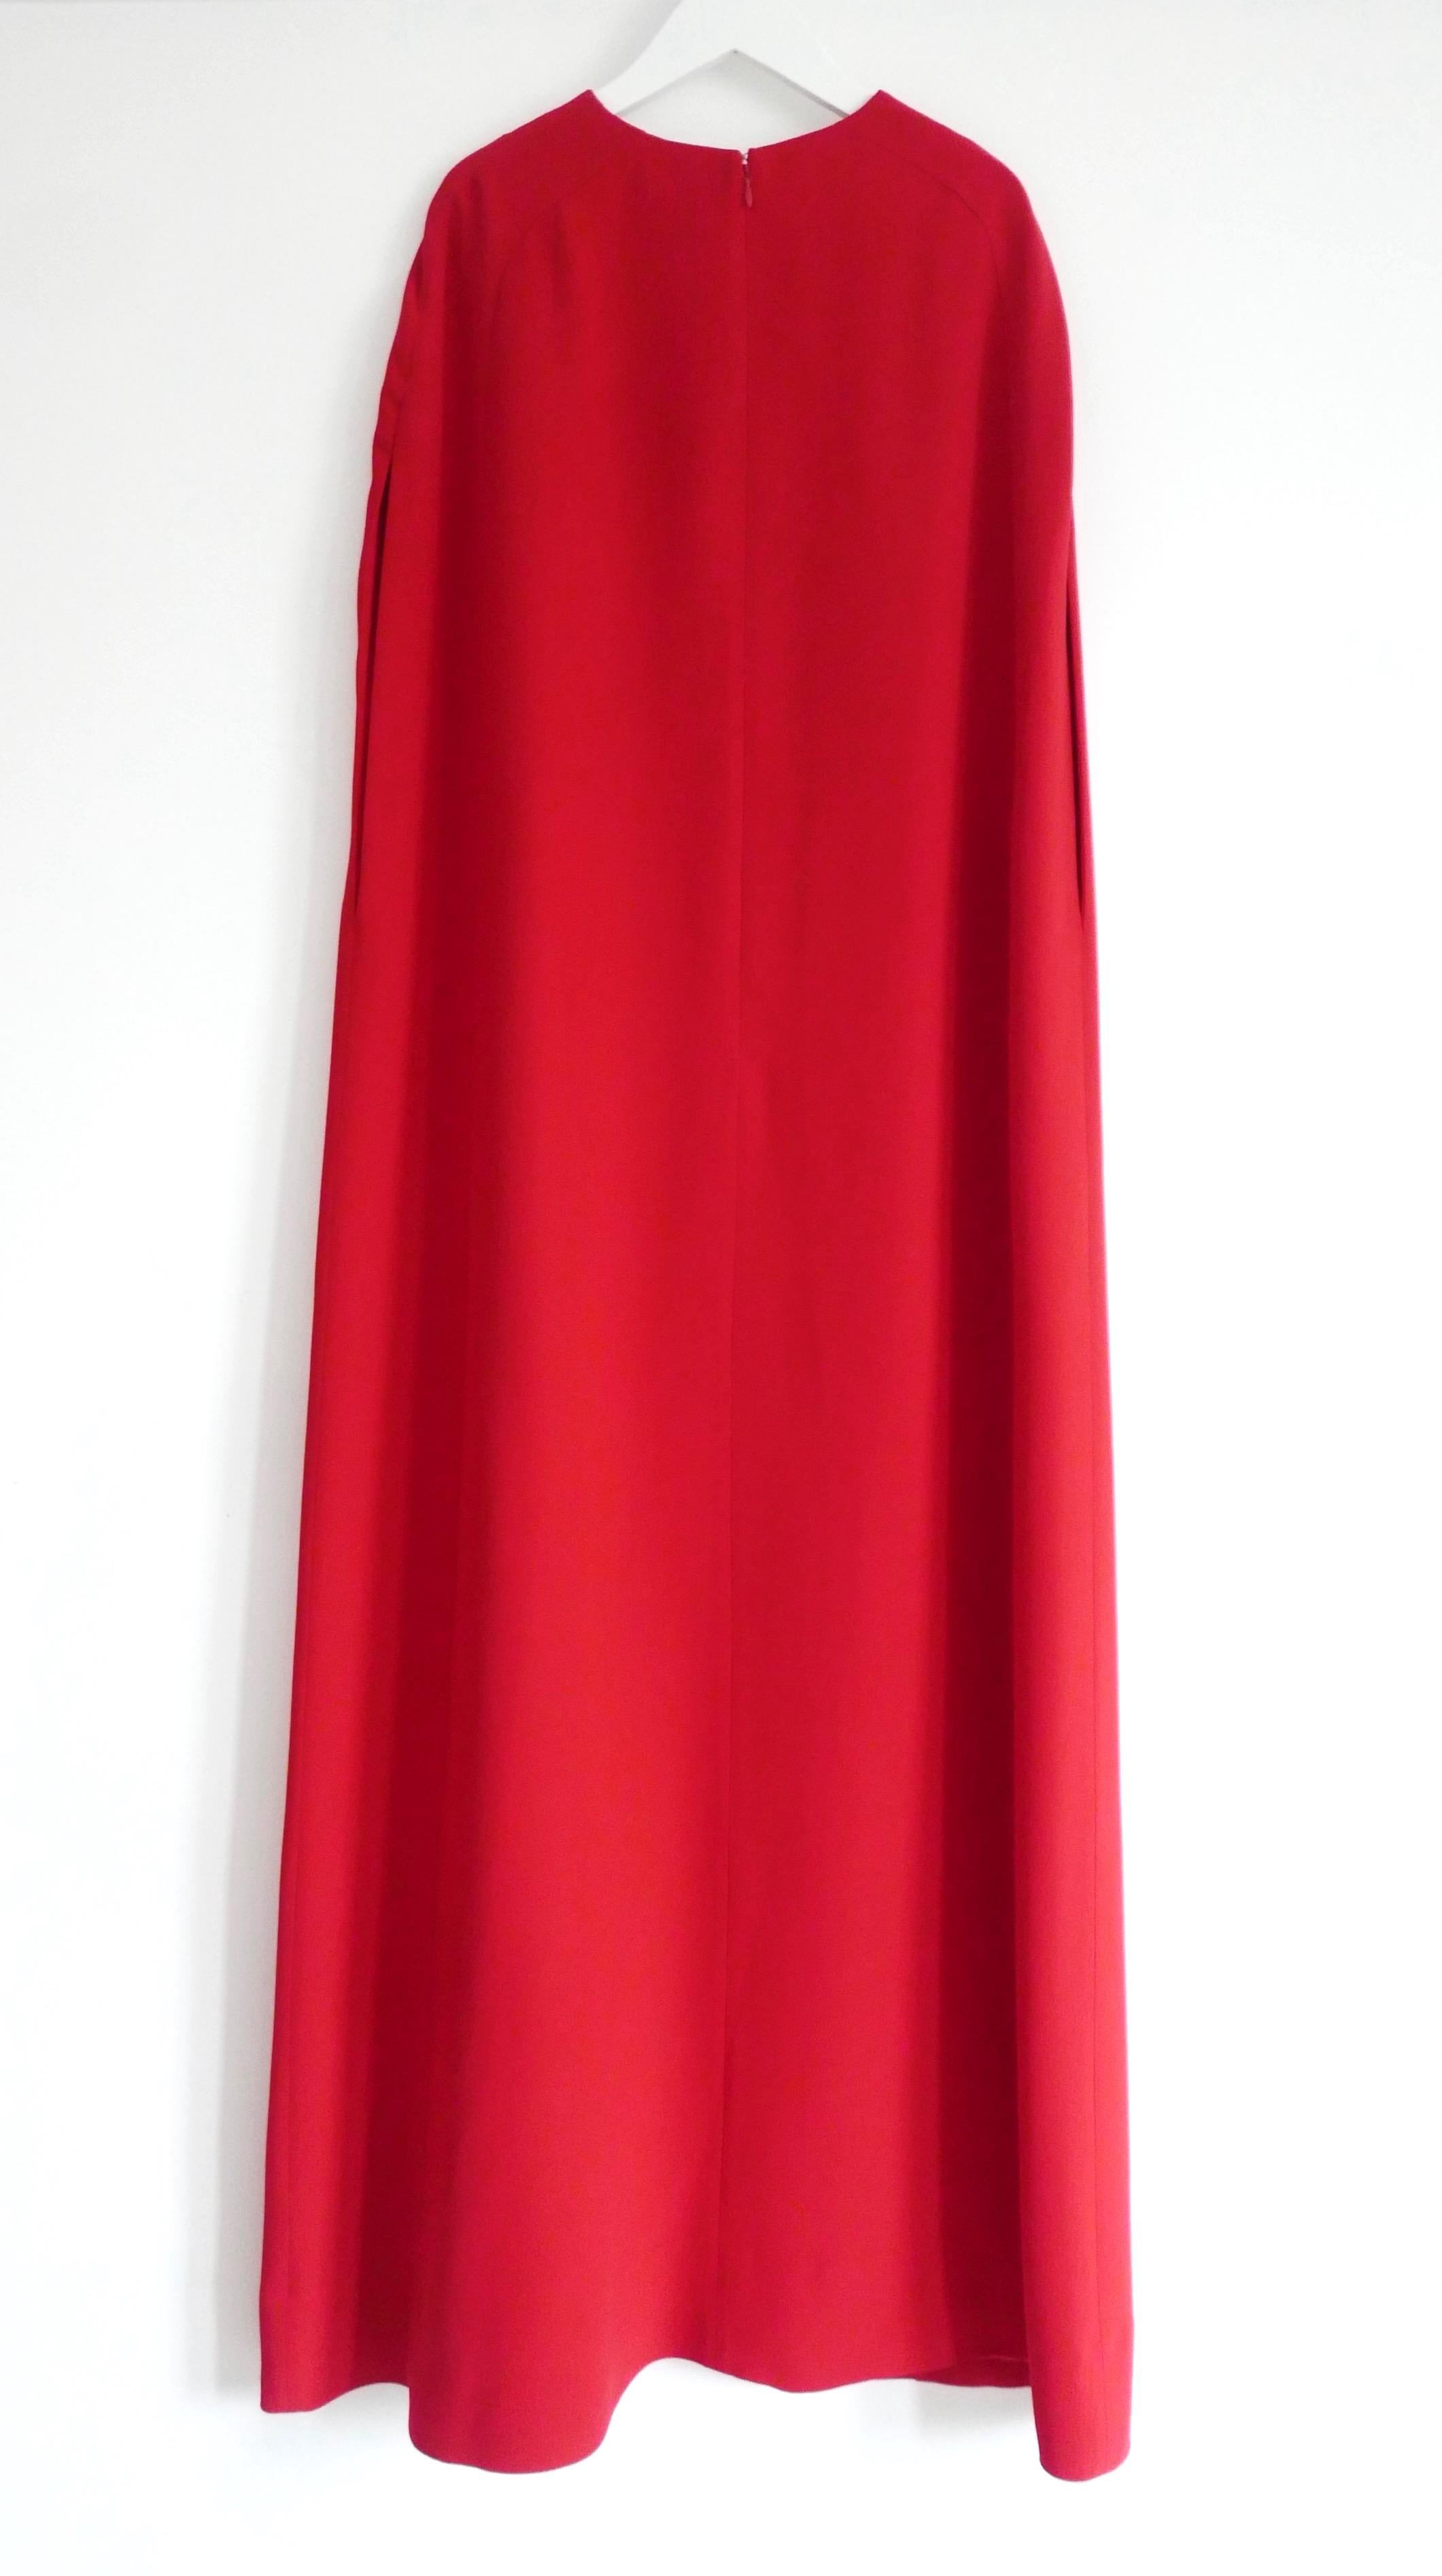  Valentino Pre-Fall 2014 Red Cape Gown Dress In Excellent Condition For Sale In London, GB